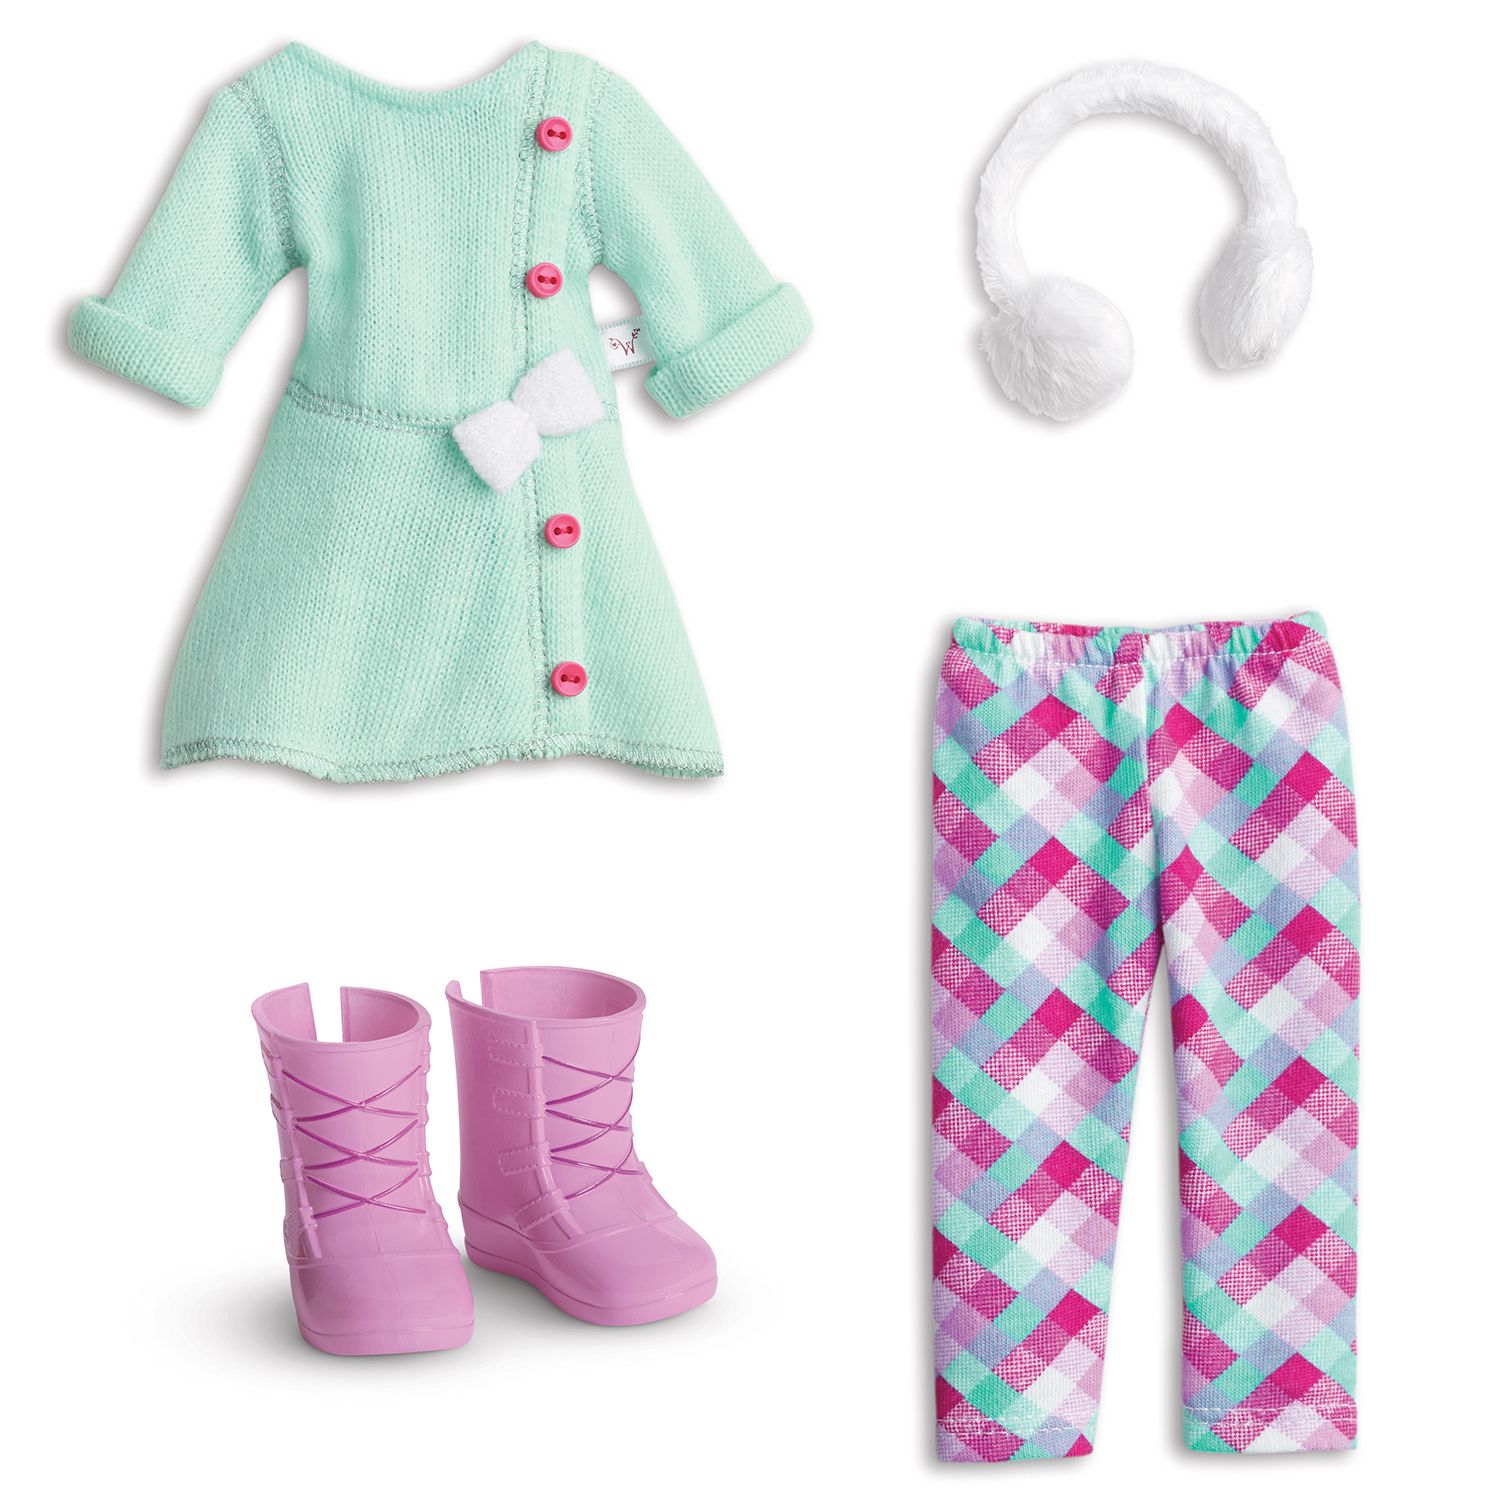 american girl snow outfit